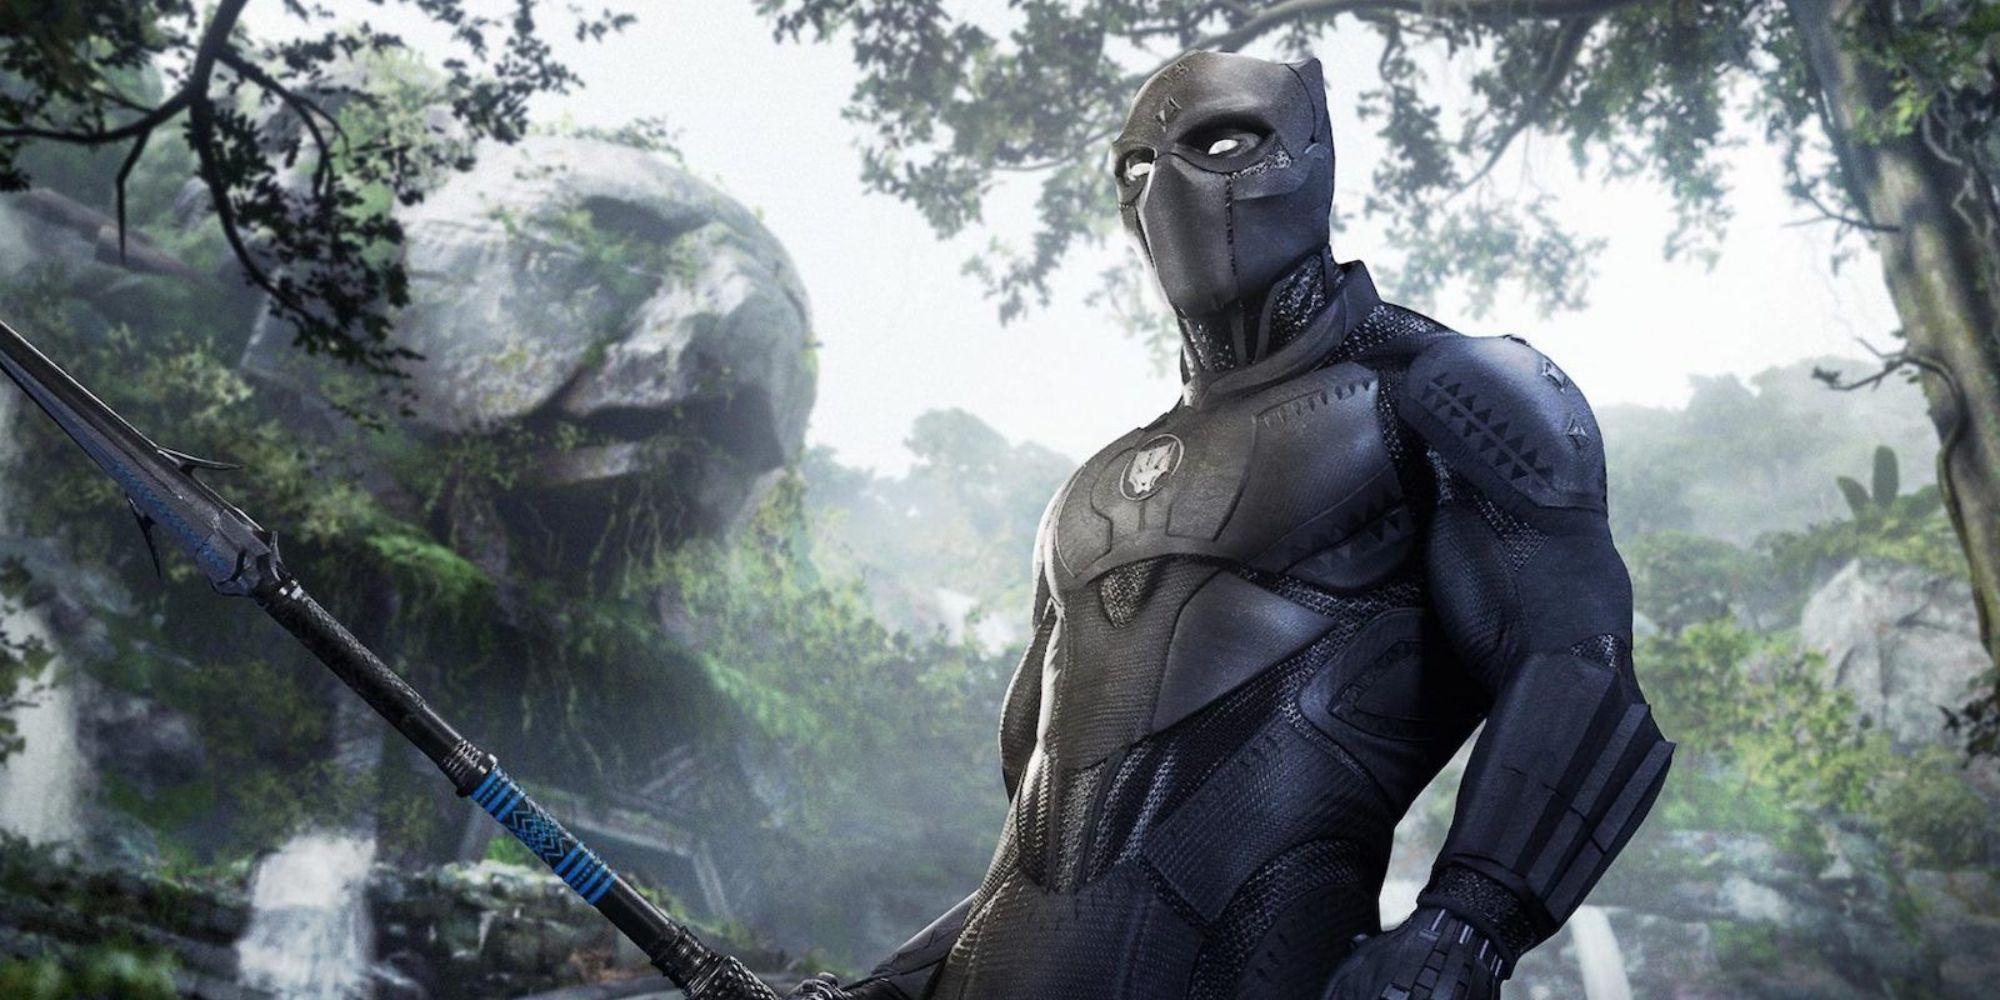 Marvel's Avengers Screenshot Showing Black Panther With A Spear